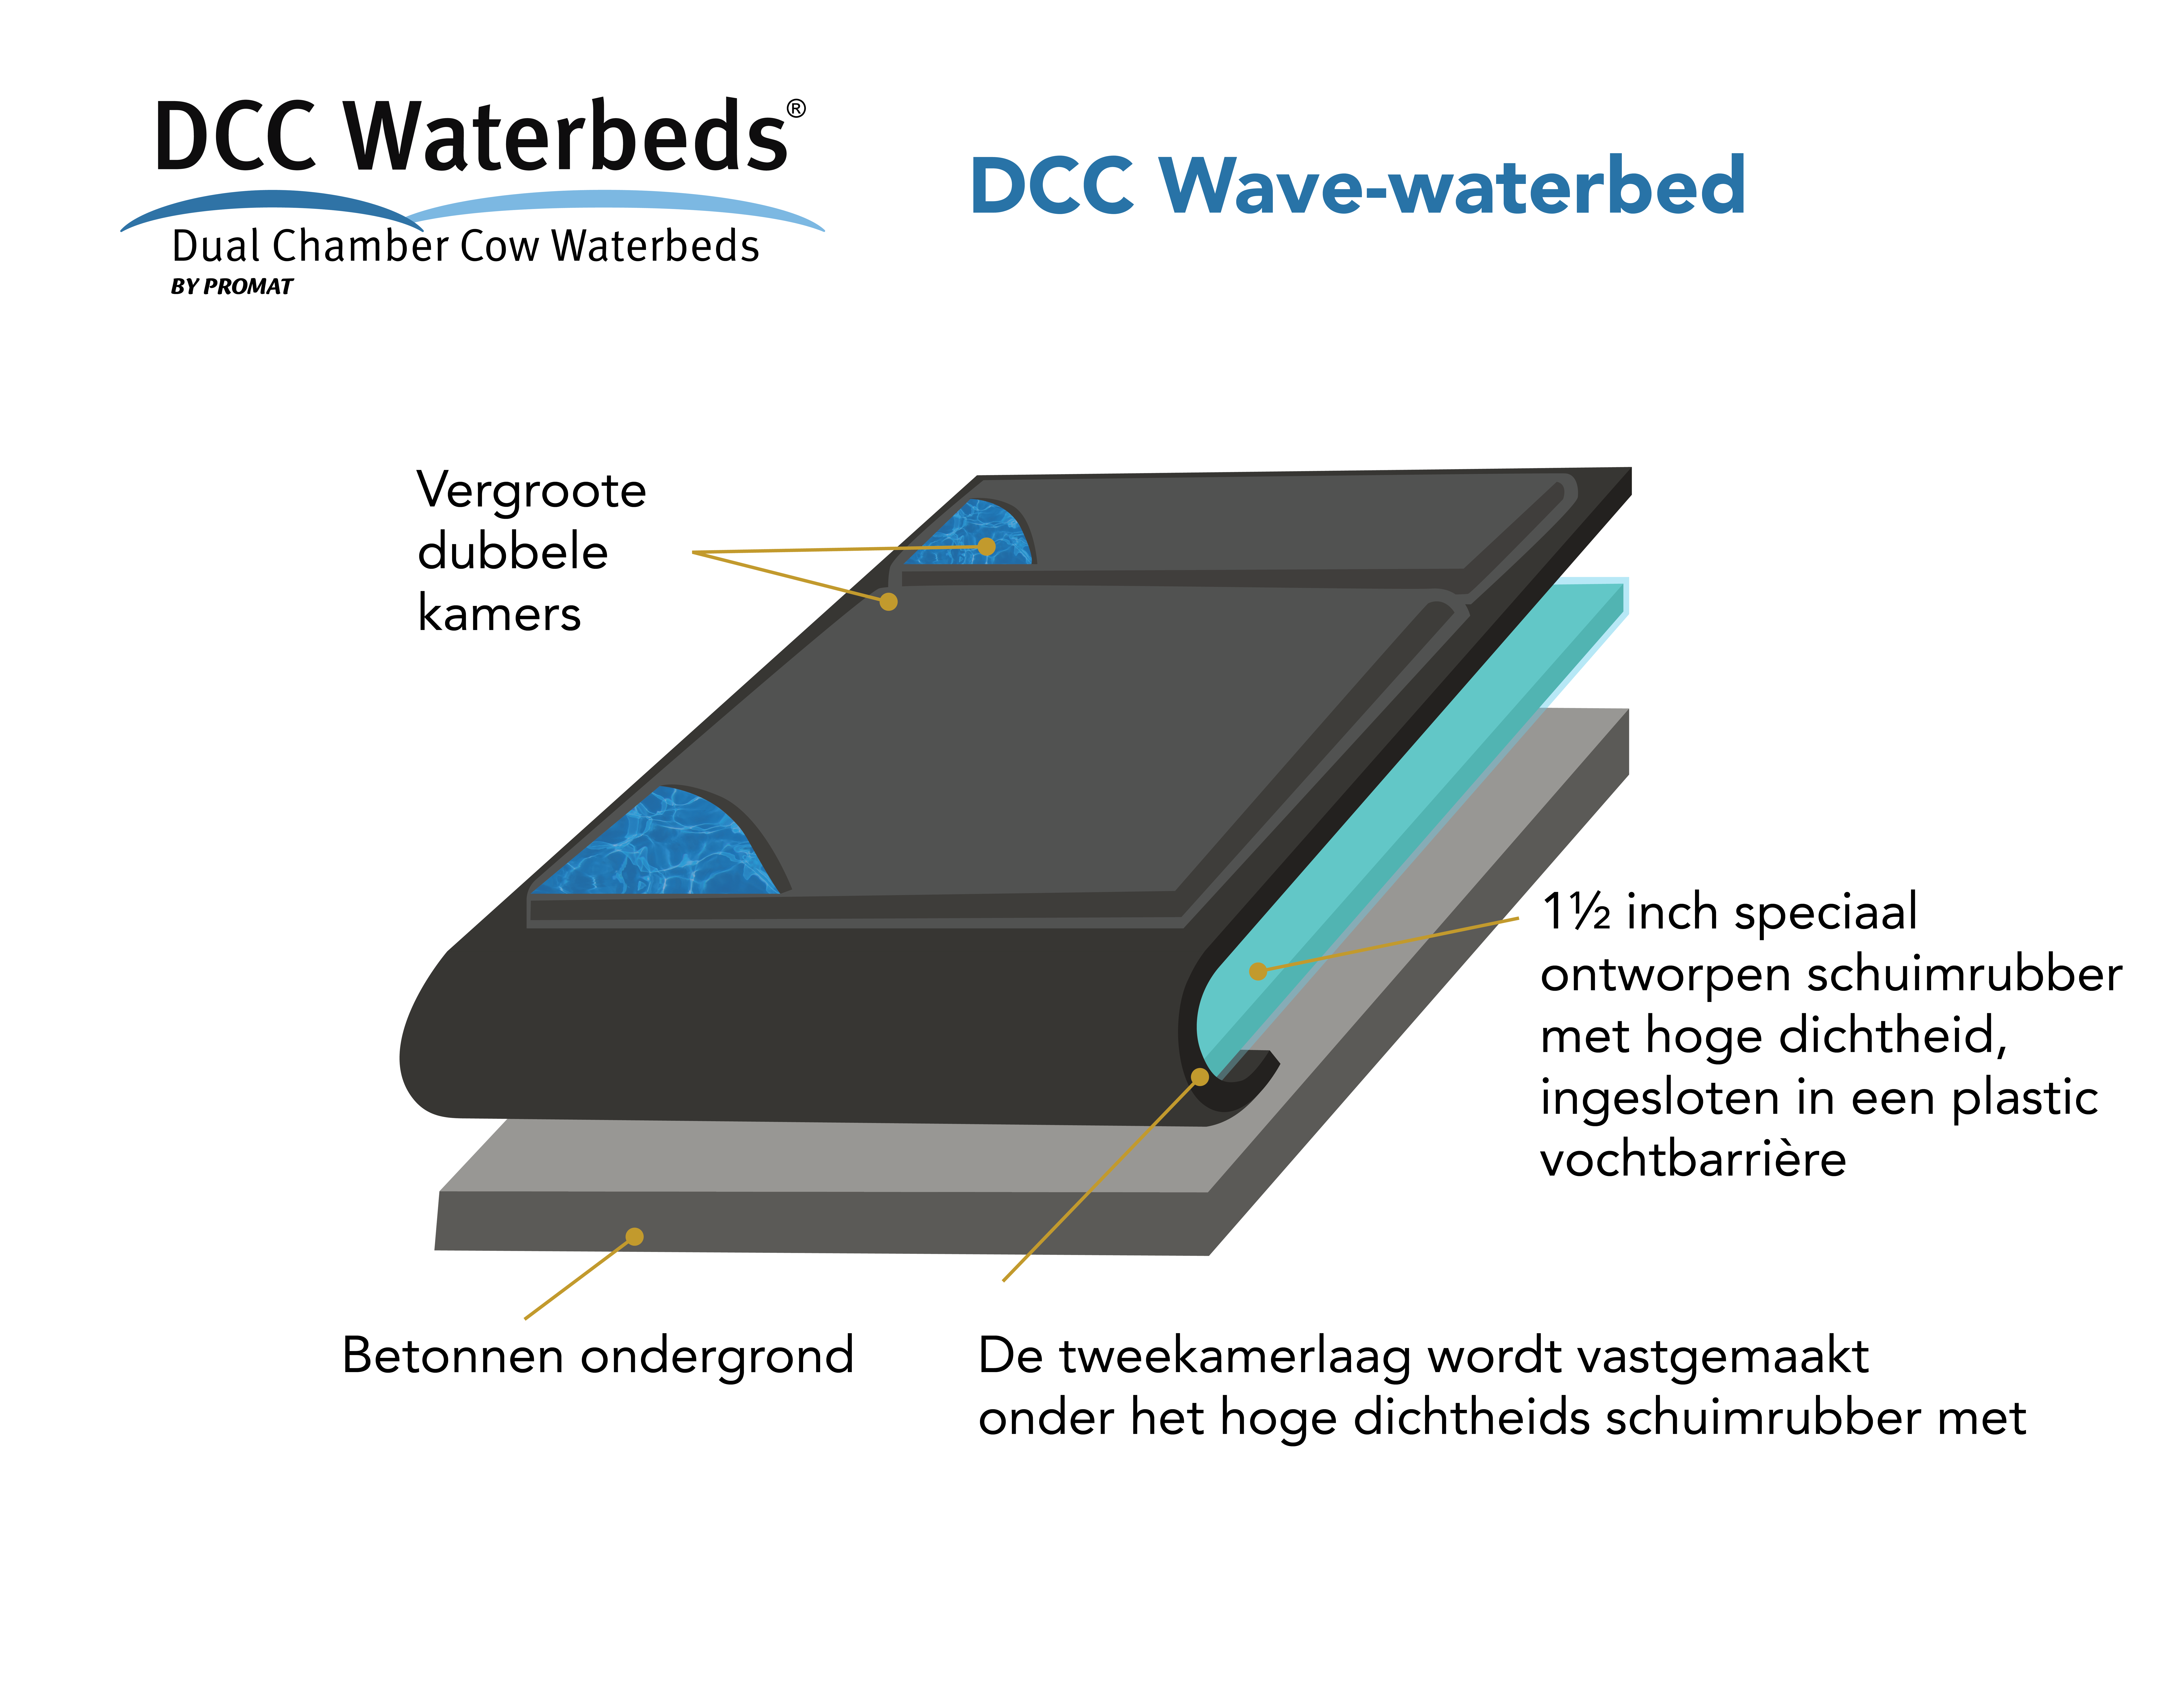 DCC Wave-waterbed